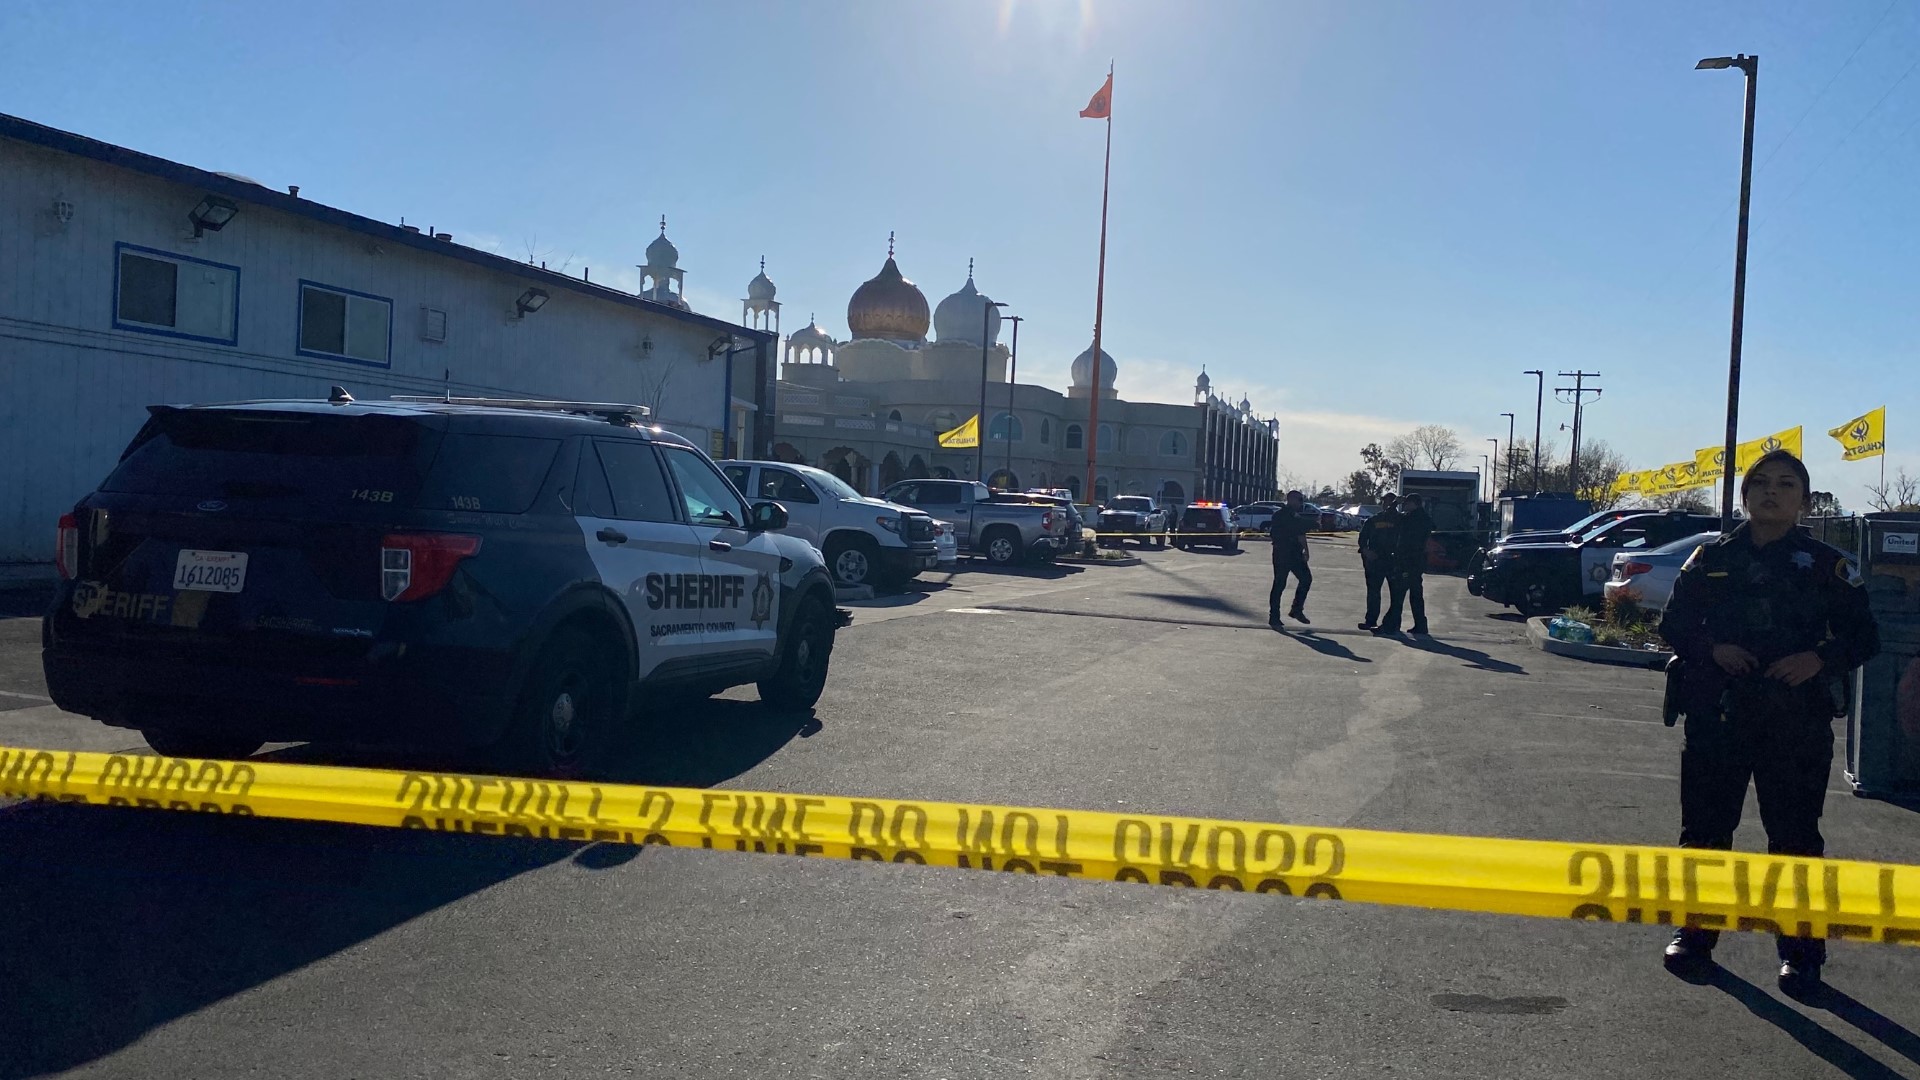 The Sacramento County Sheriff's Office is investigating a shooting that left two people hurt at the Sikh temple along Bradshaw road